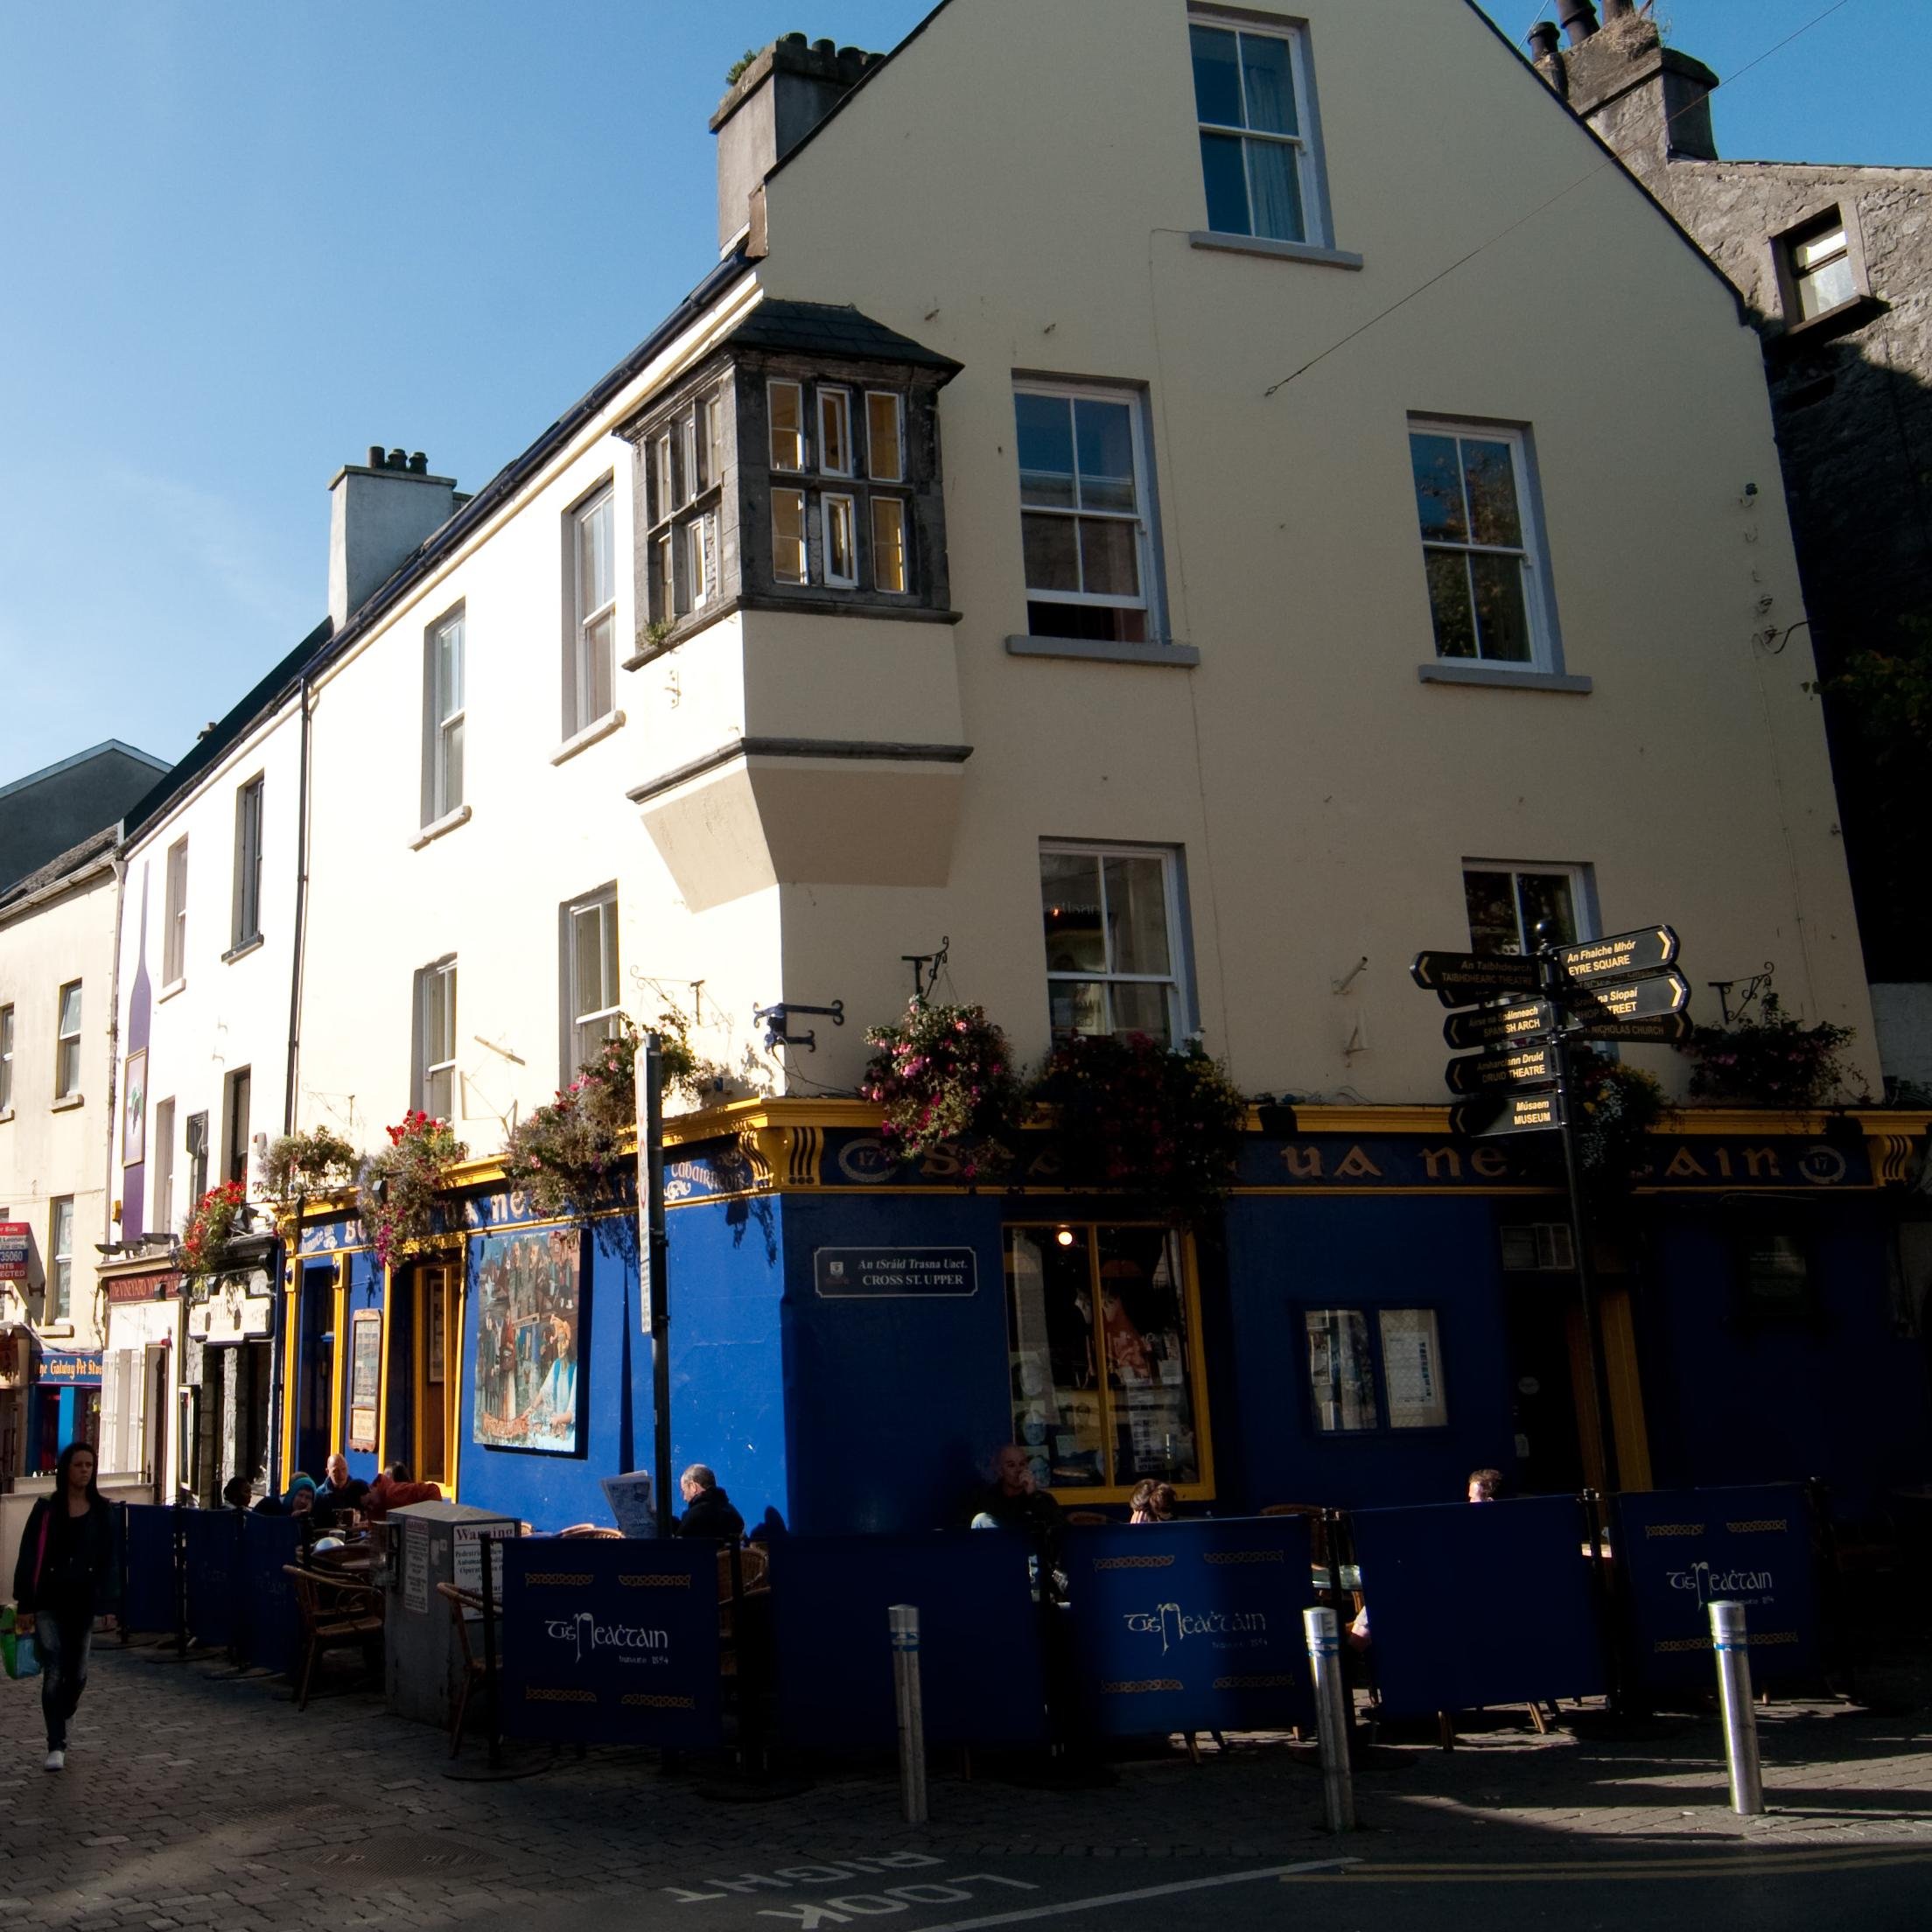 Tigh Neachtain has been an established pub at the heart of Galway city since 1894! Drop in for some live music and a taste our delicious food and craft beers.